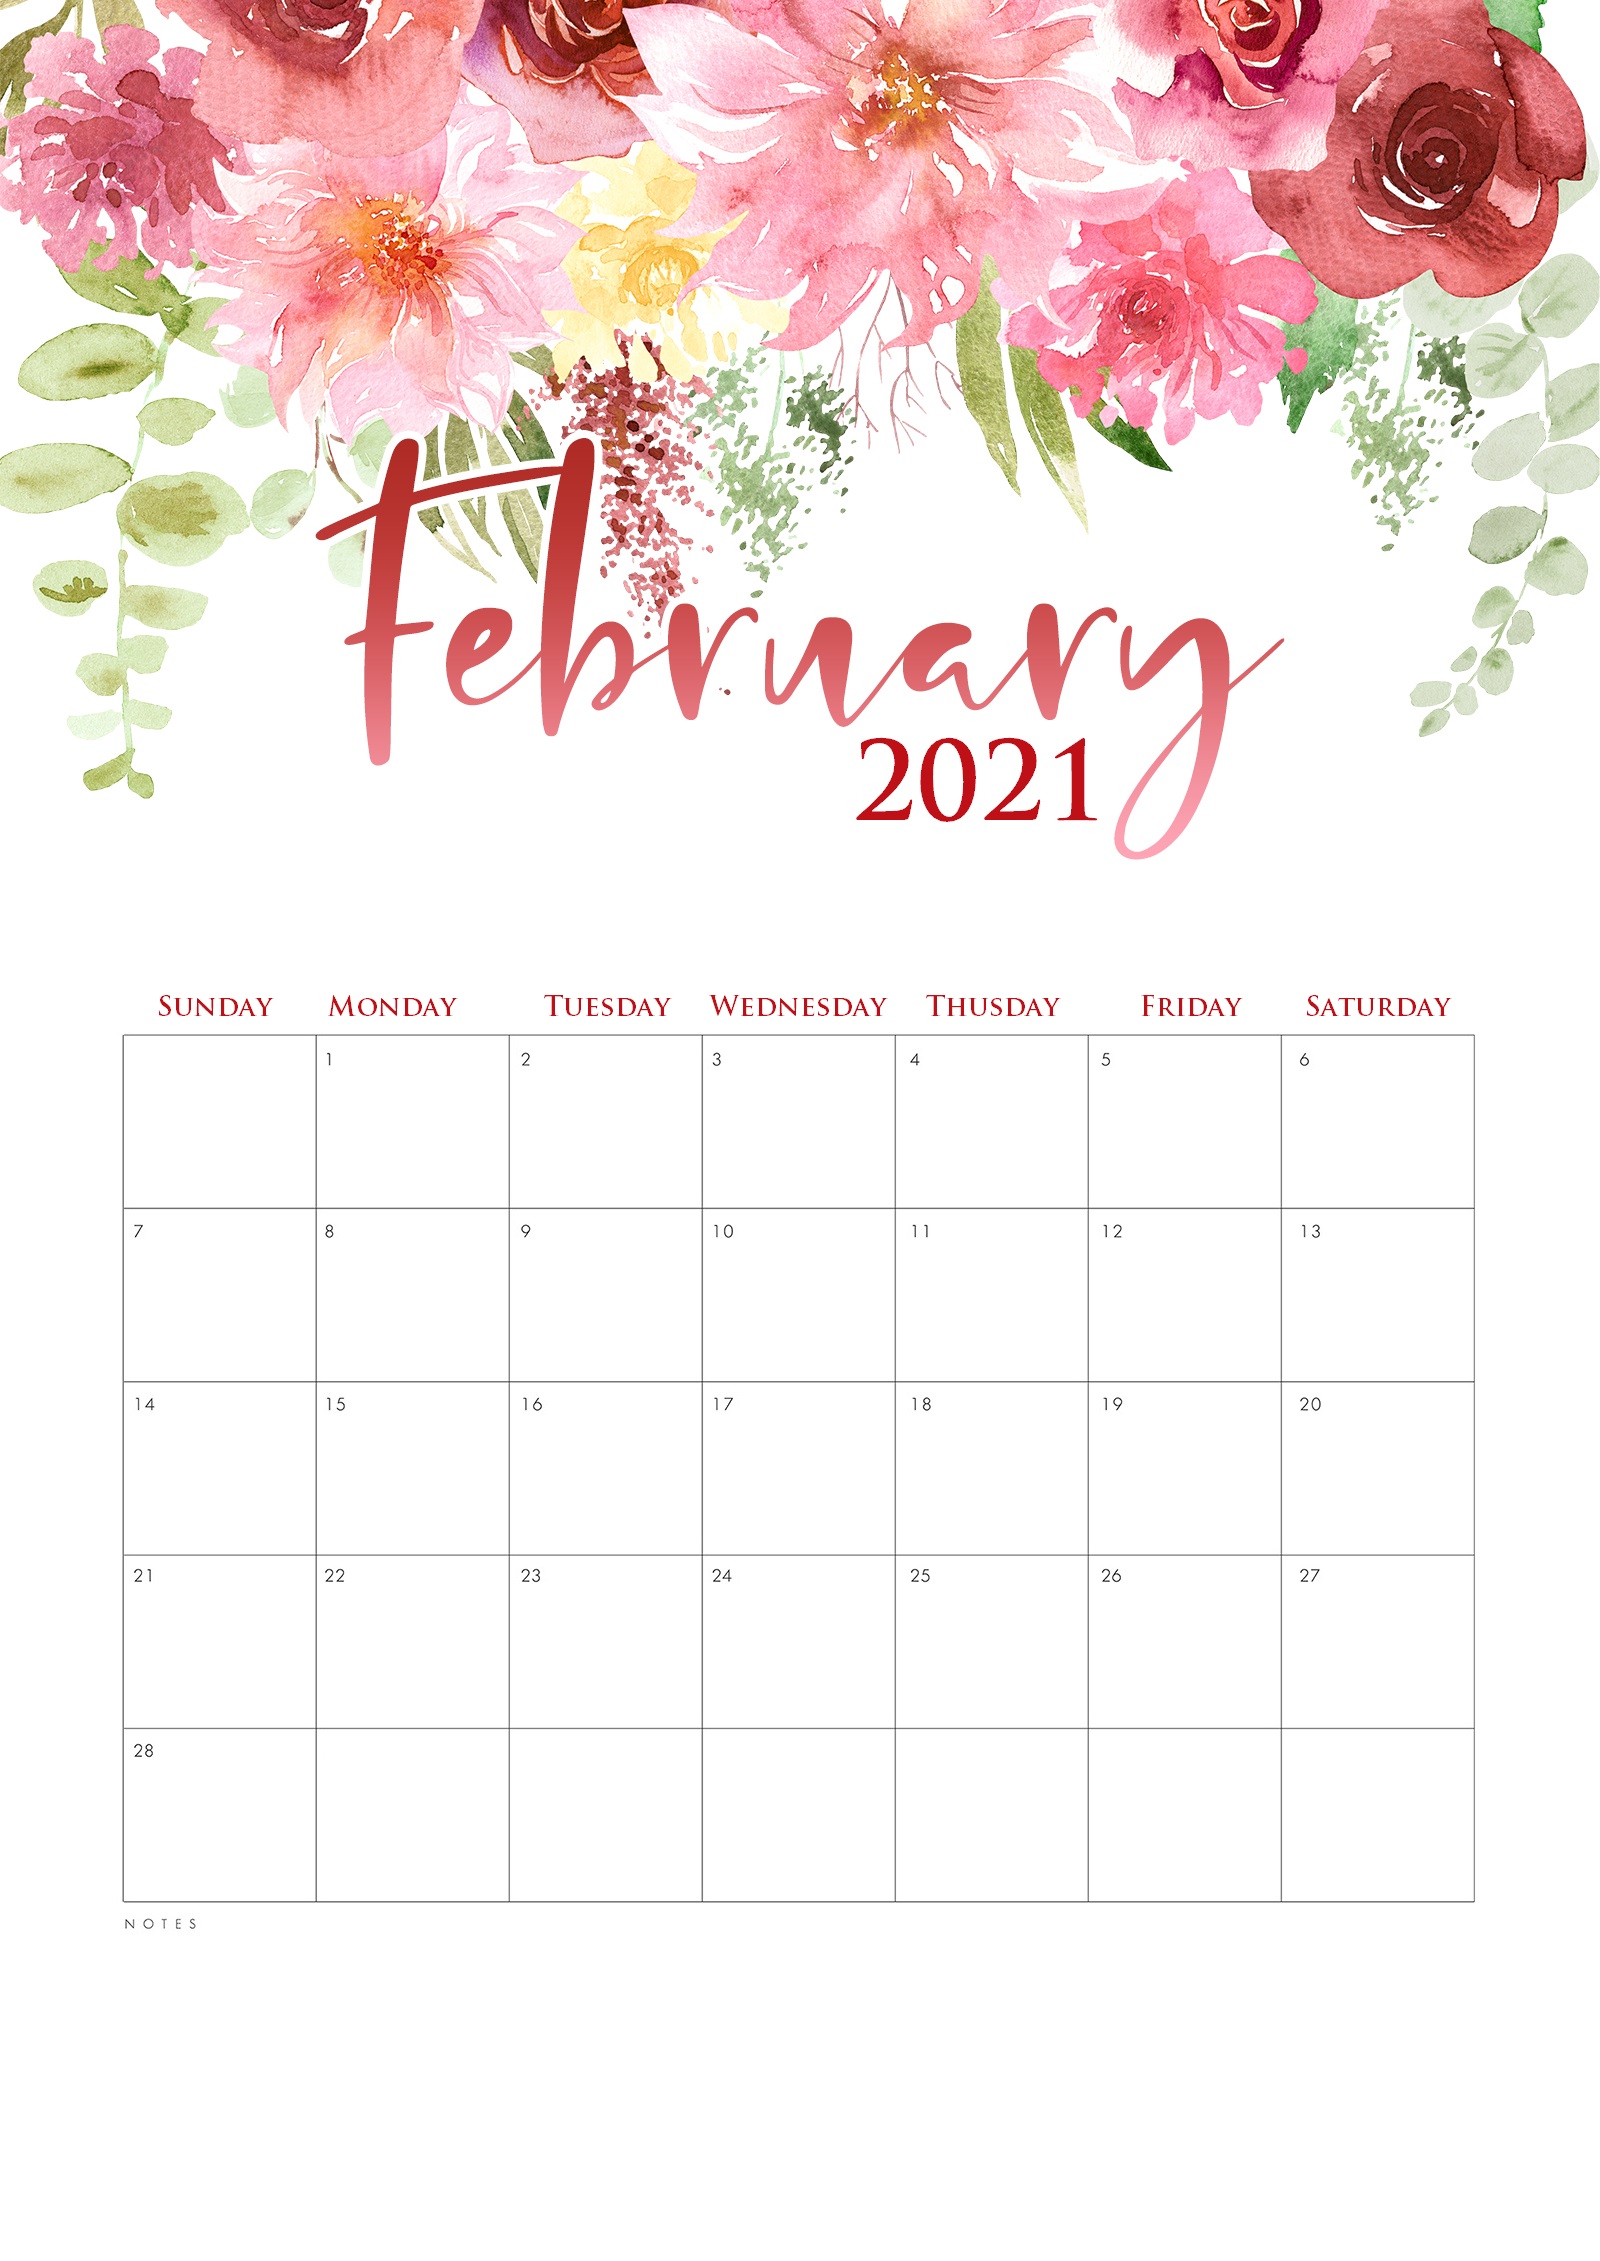 30 Free February 2021 Calendars For Home Or Office Onedesblog Save this calendar to your computer for easy access. 30 free february 2021 calendars for